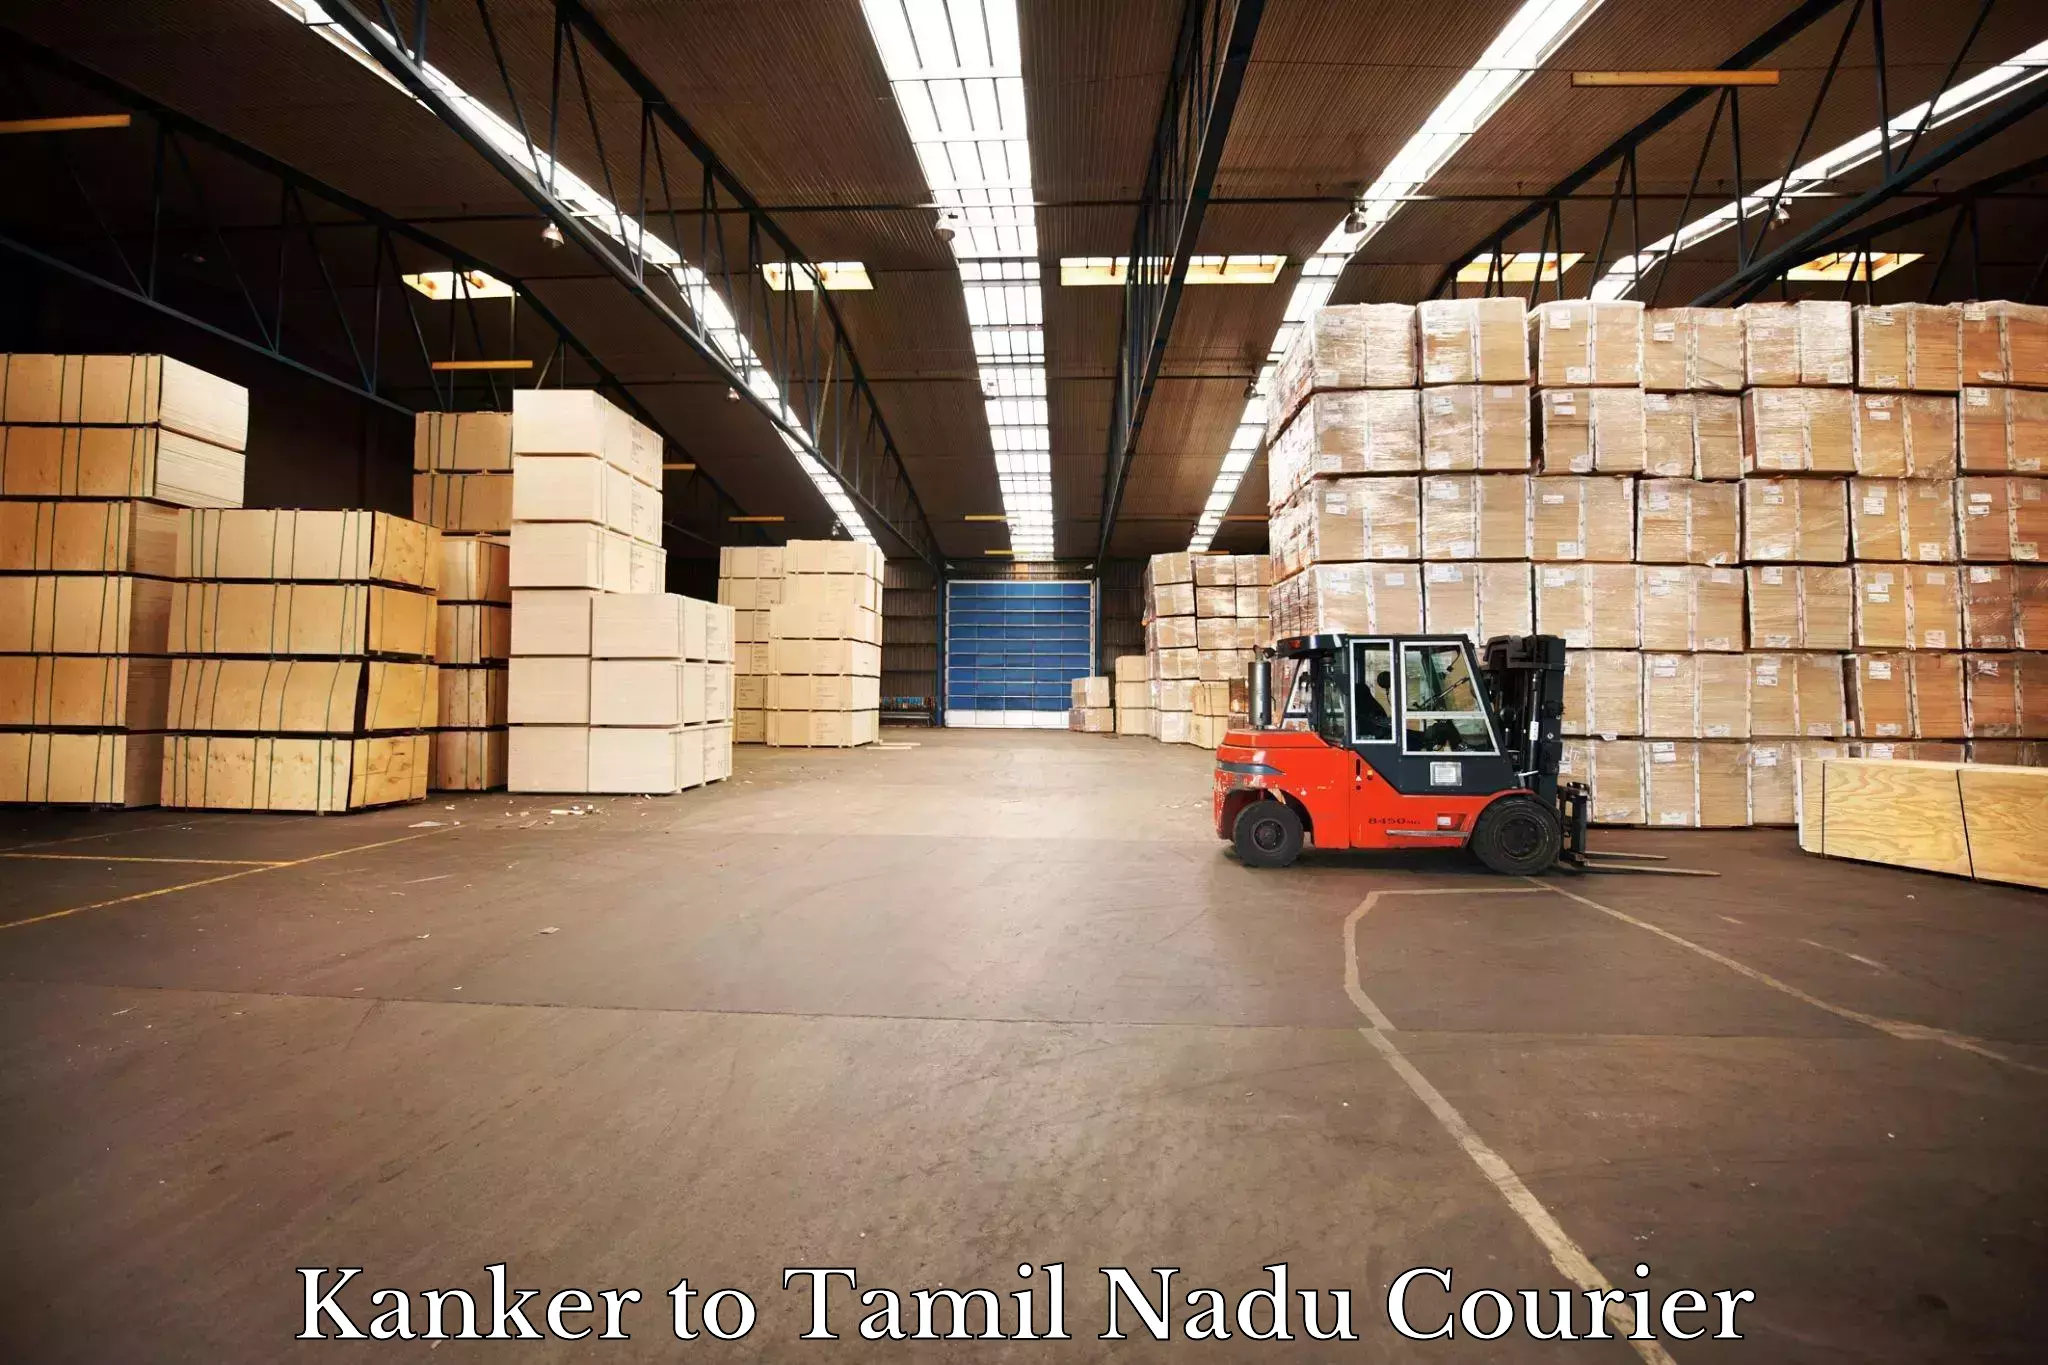 Global shipping networks Kanker to Sriperumbudur